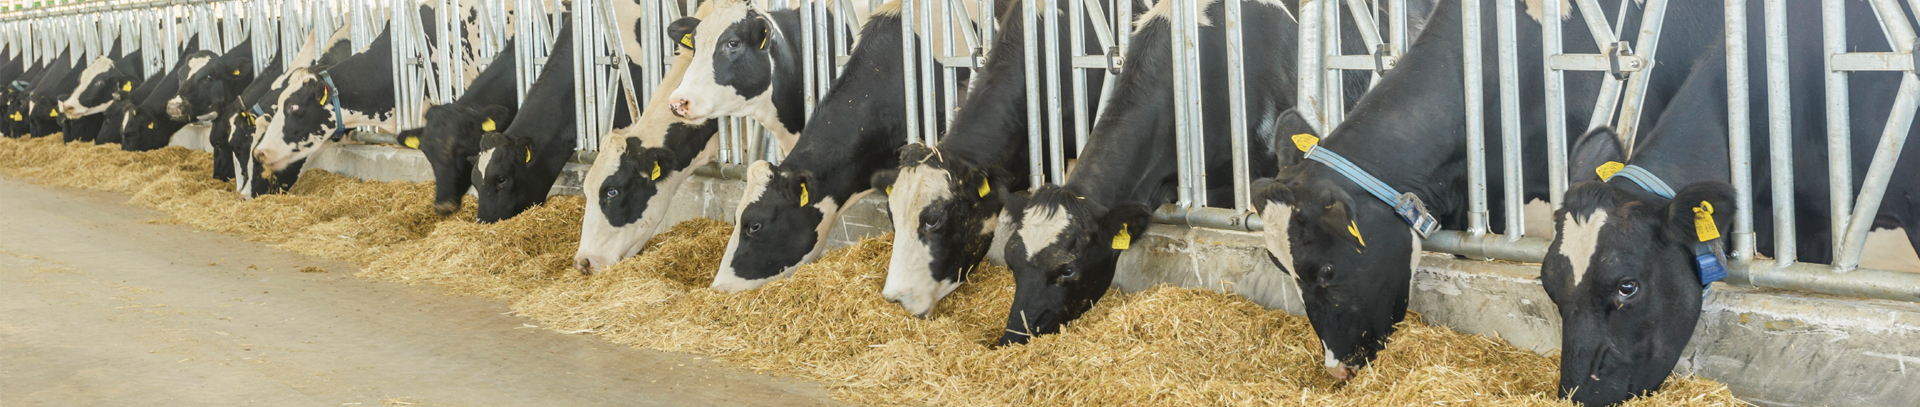 Dairy Farm Operating Trends